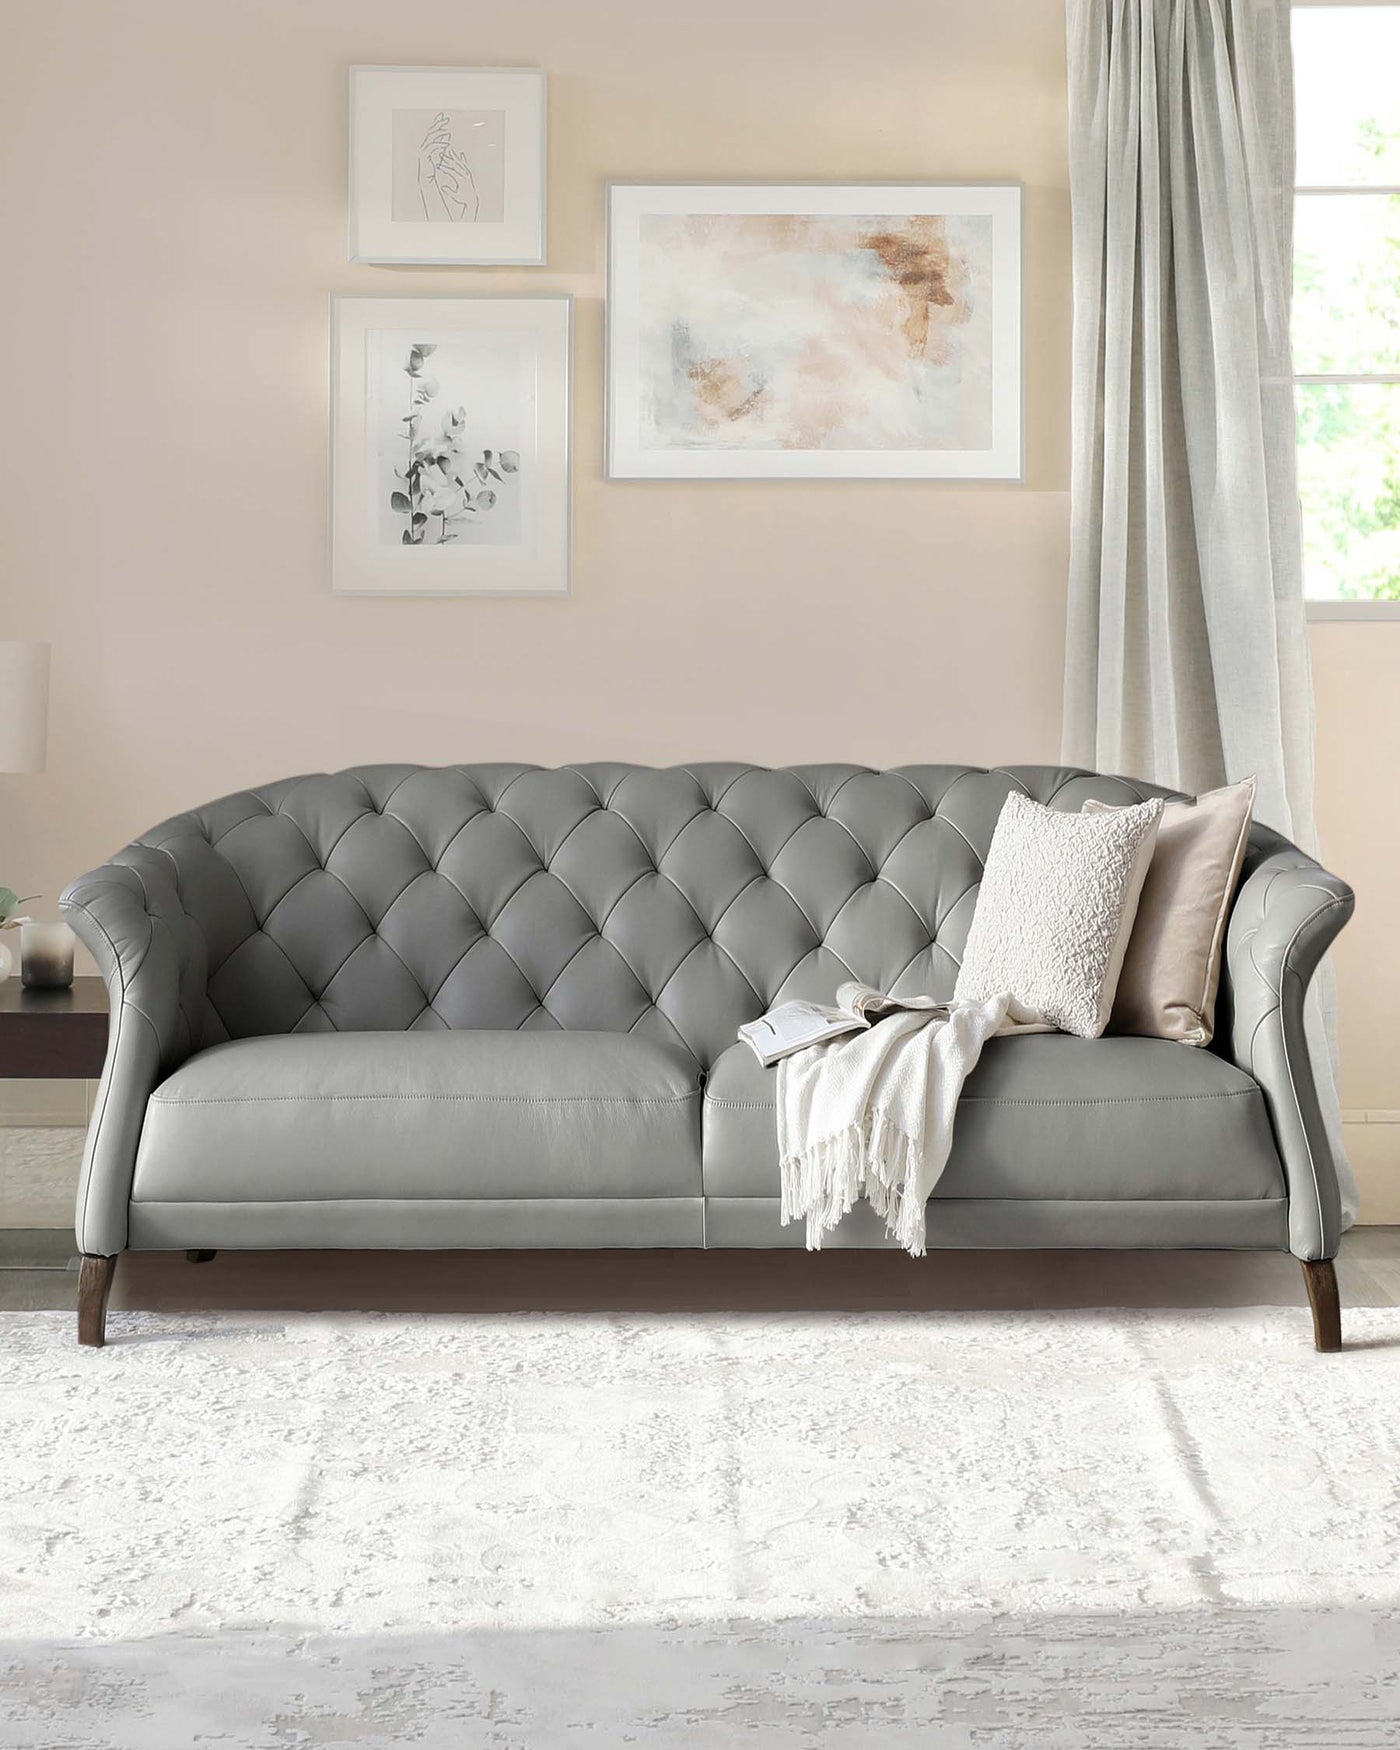 Elegant classic-style tufted sofa in light grey upholstery, featuring a curvaceous backrest and arms, with dark wooden legs. The sofa is accessorized with a textured throw blanket and a decorative cushion.